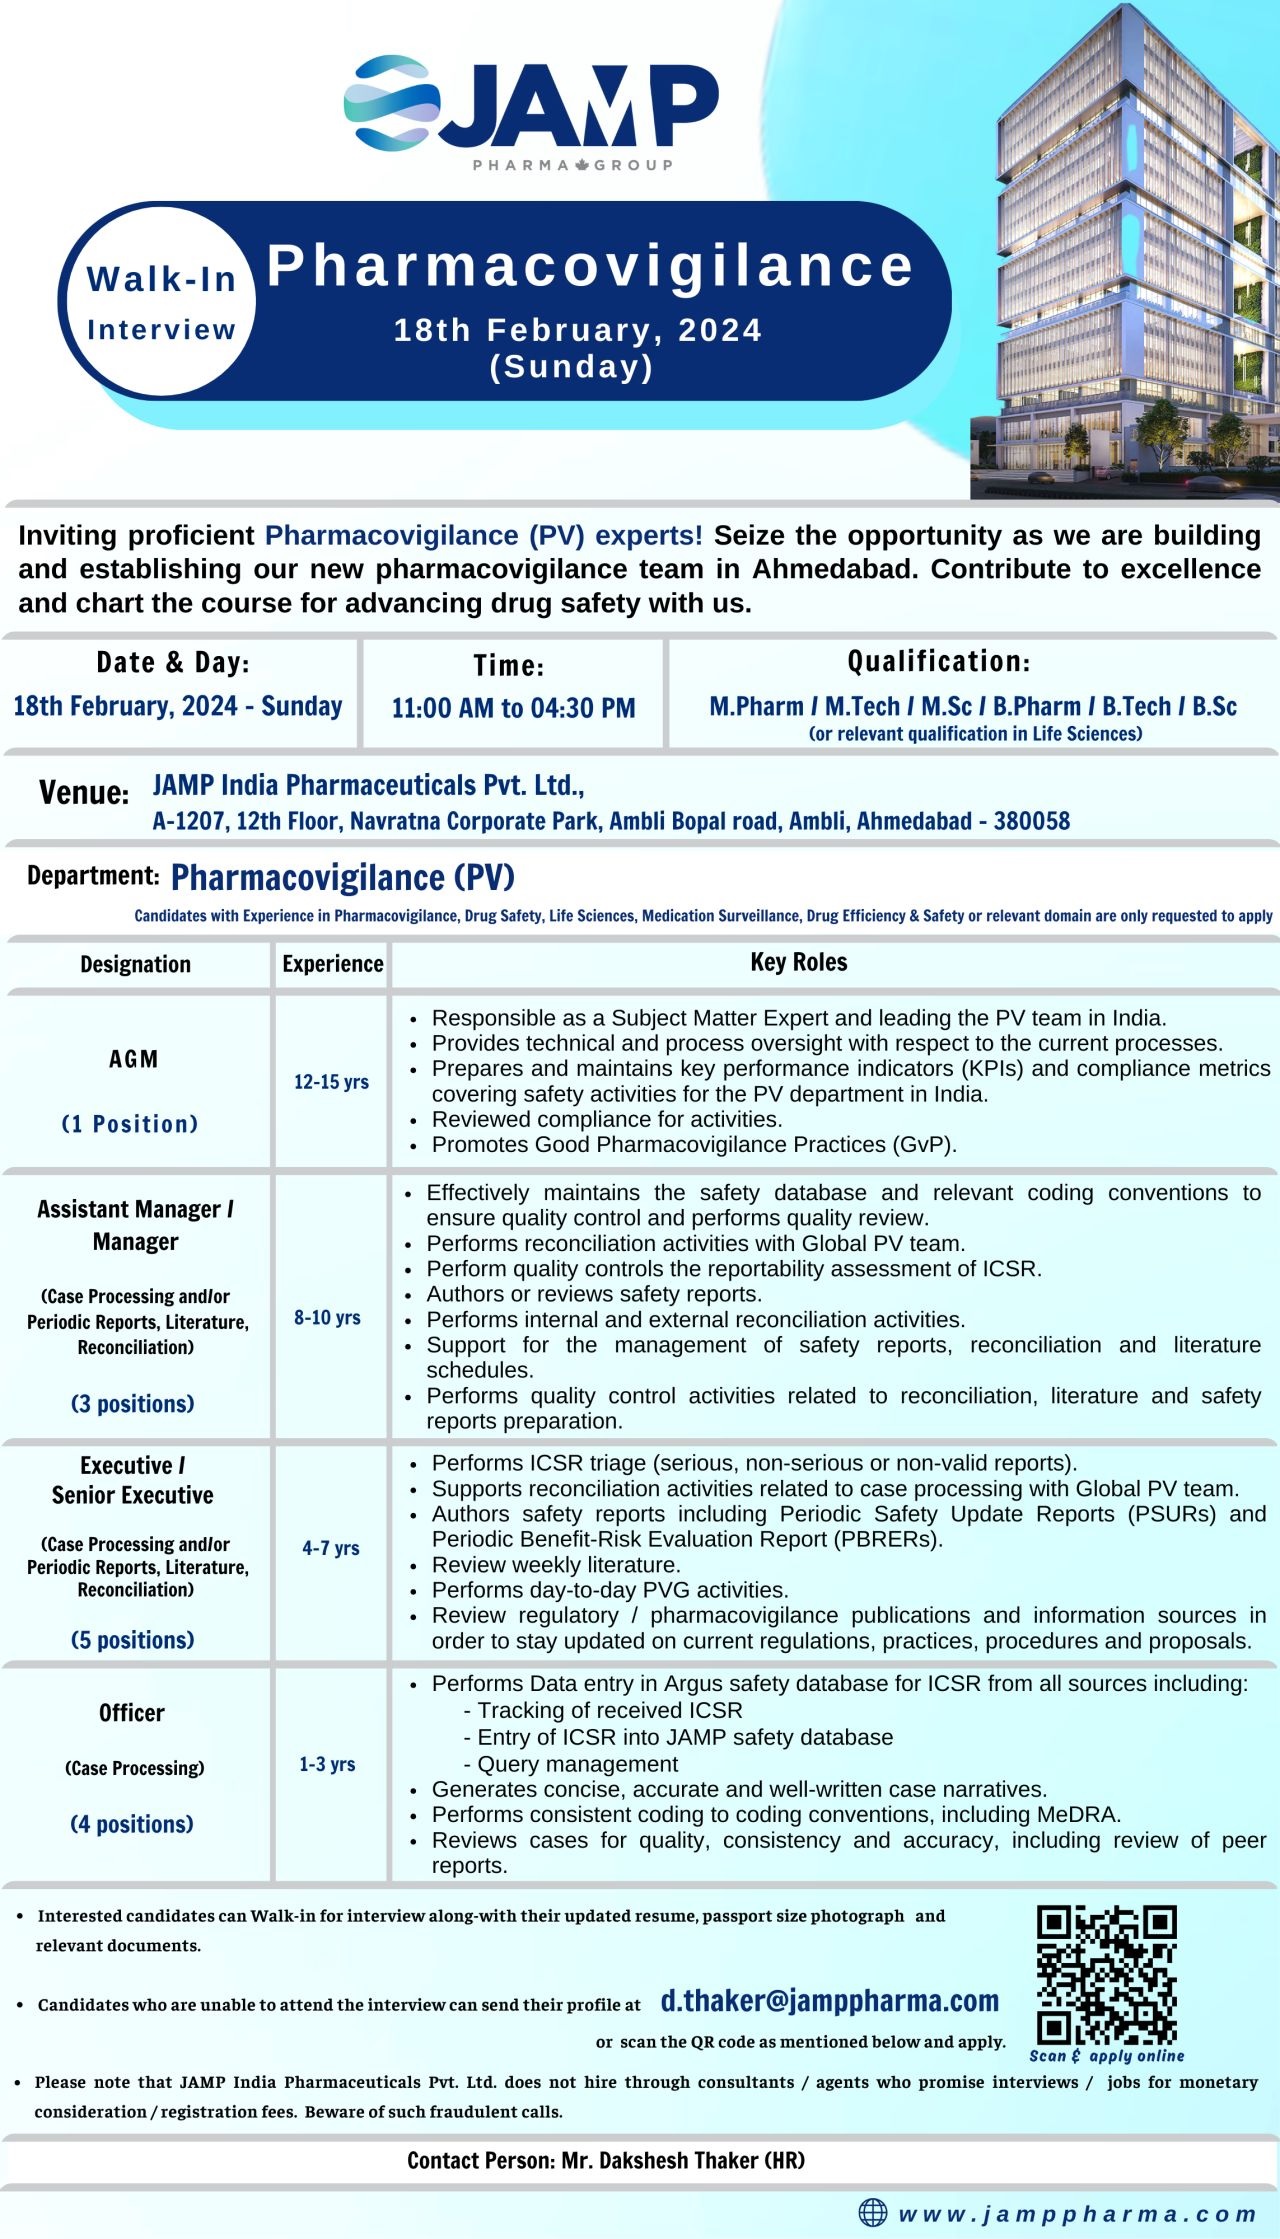 JAMP - Walk-In Interview for Pharmacovigilance (PV) on 18th February 2024